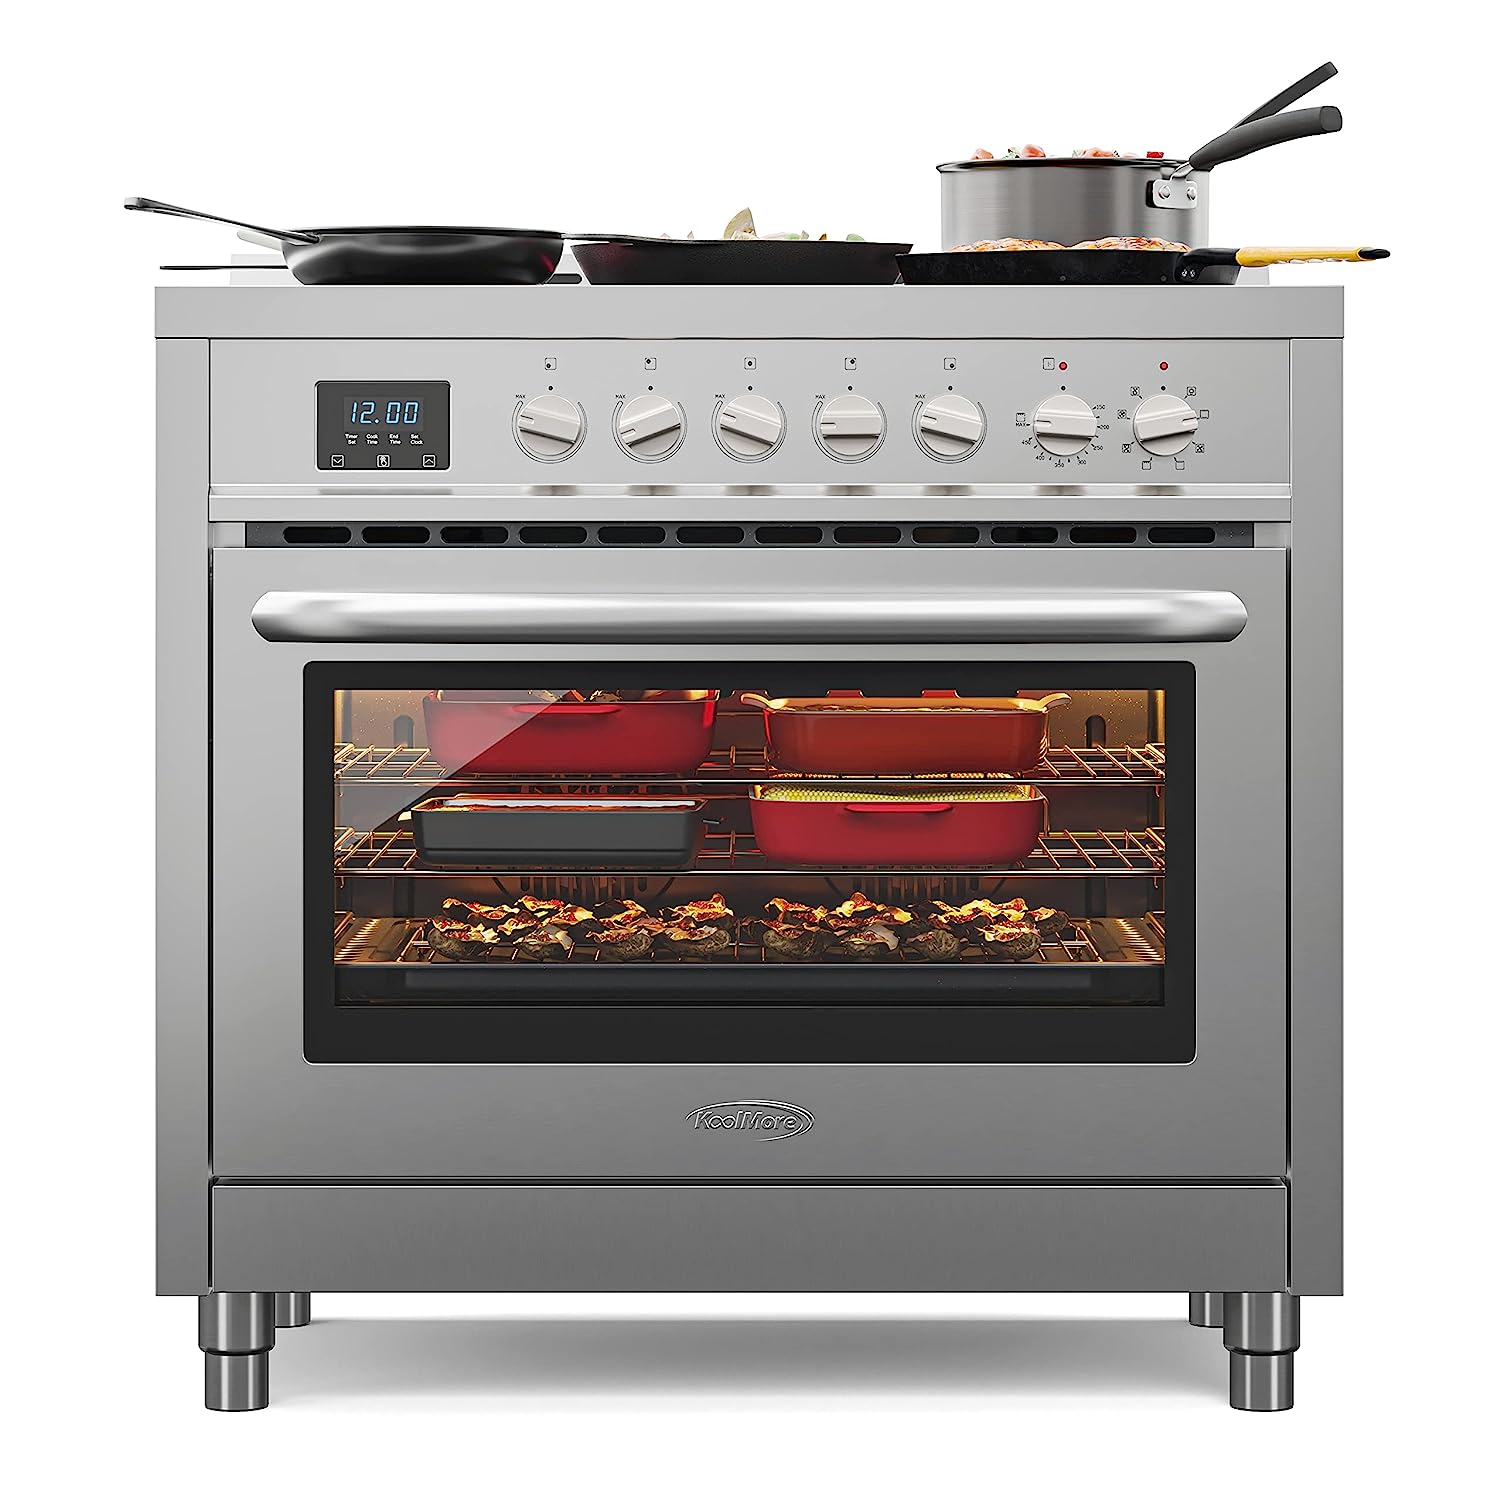 KoolMore 36 Inch All-Electric Range Oven with Ceramic [...]